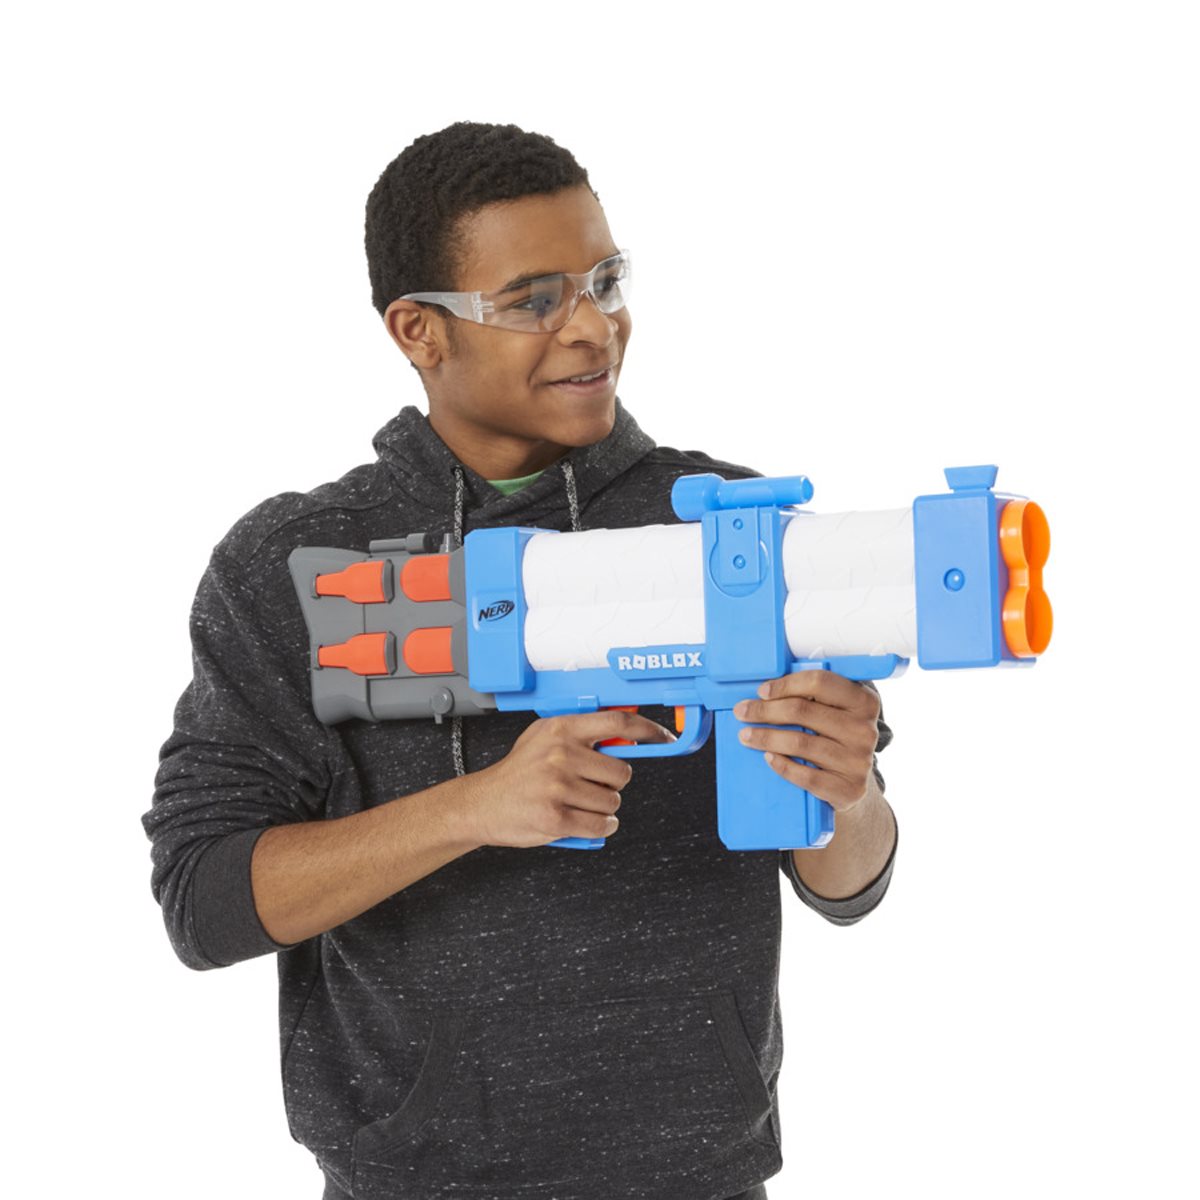 Get your hands on the Arsenal Soul Catalyst blaster from Nerf